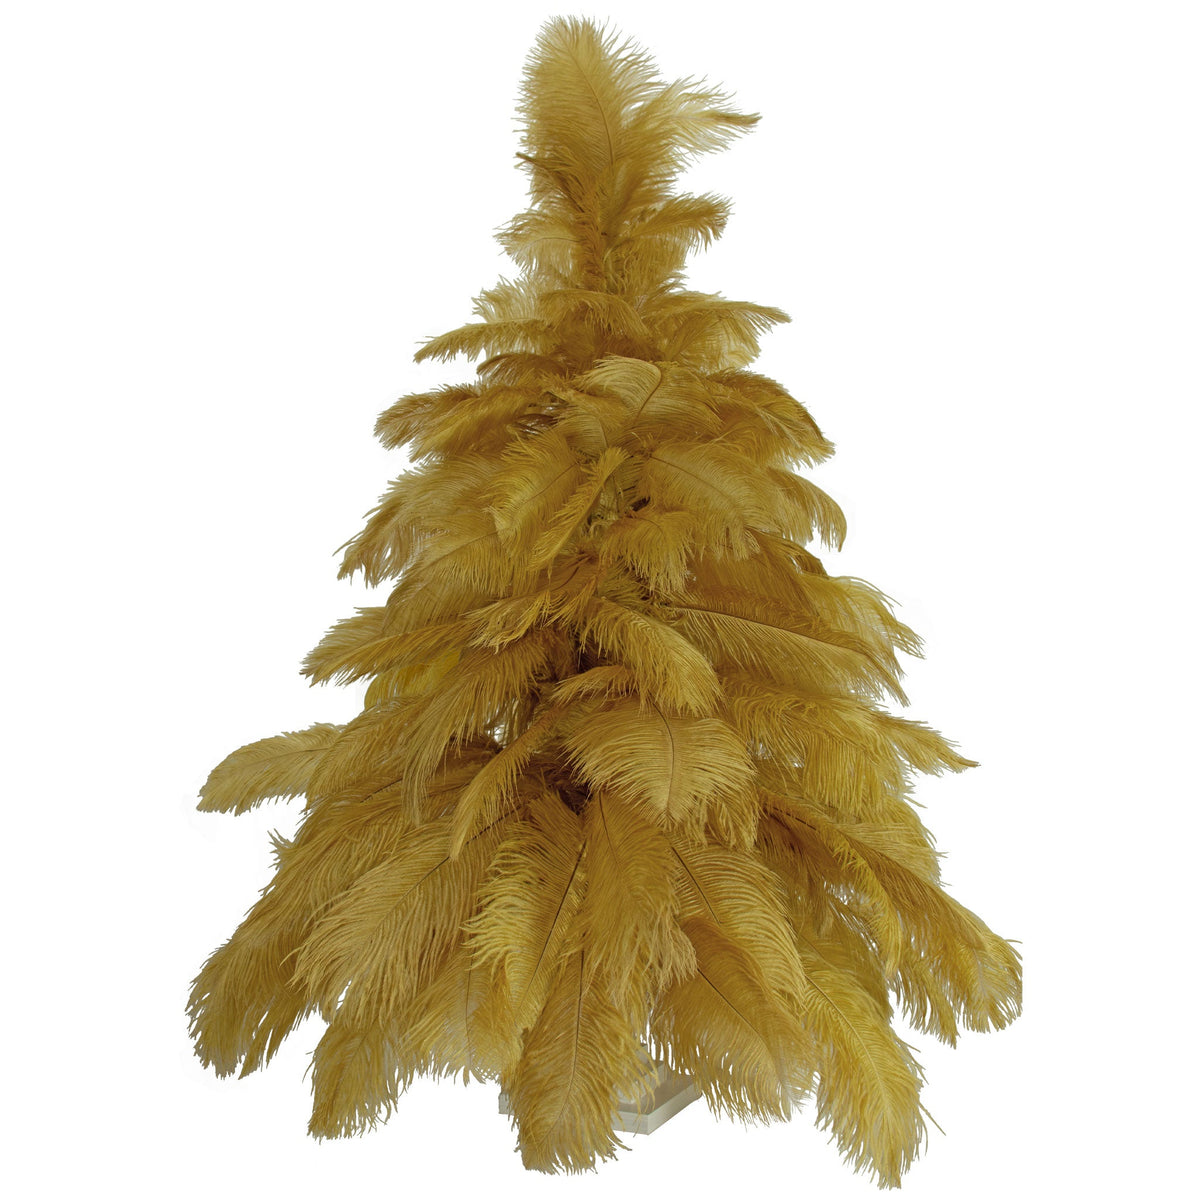 Introducing Lee Display's brand new Brown Ostrich Feather Christmas Trees! Made with real ostrich feathers